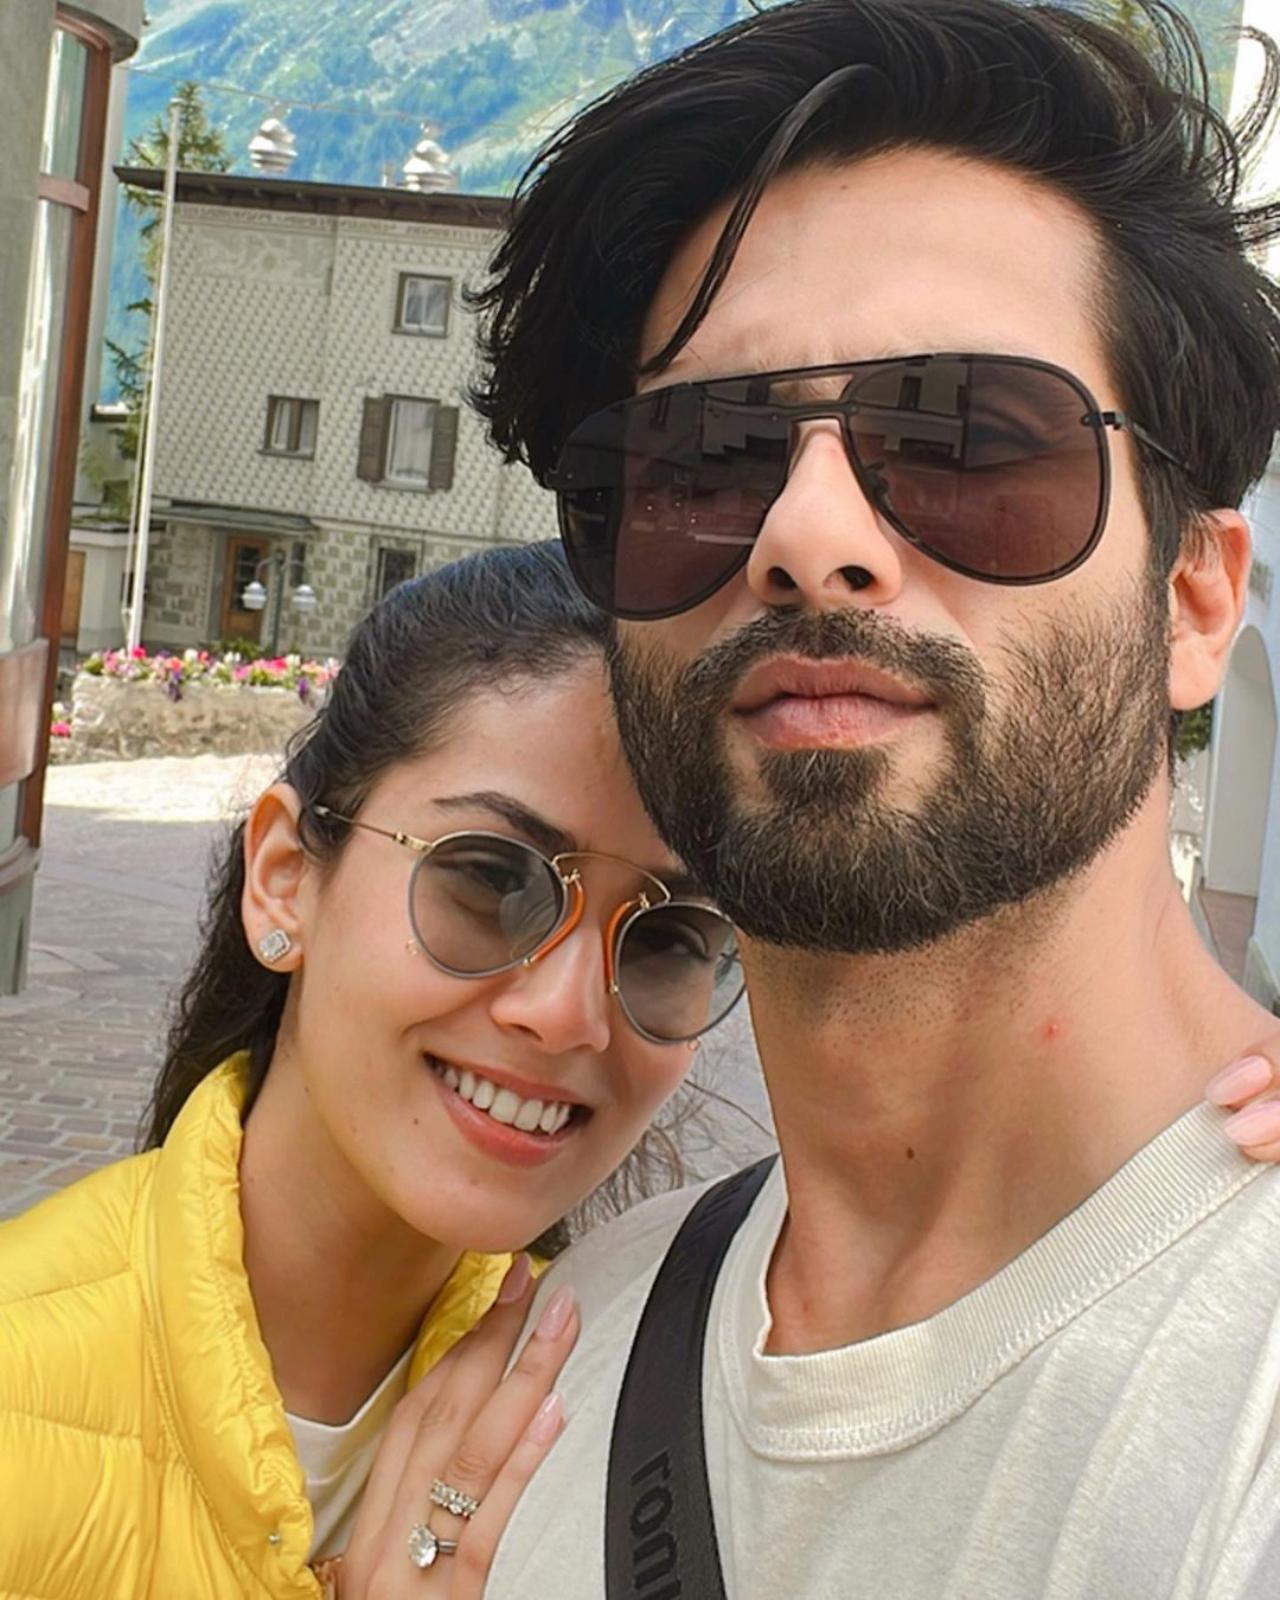 Shahid Kapoor opens up about marrying Mira Rajput when she was 20
Talking about his arranged marriage with Mira, someone who is not from the film industry, the actor said, 